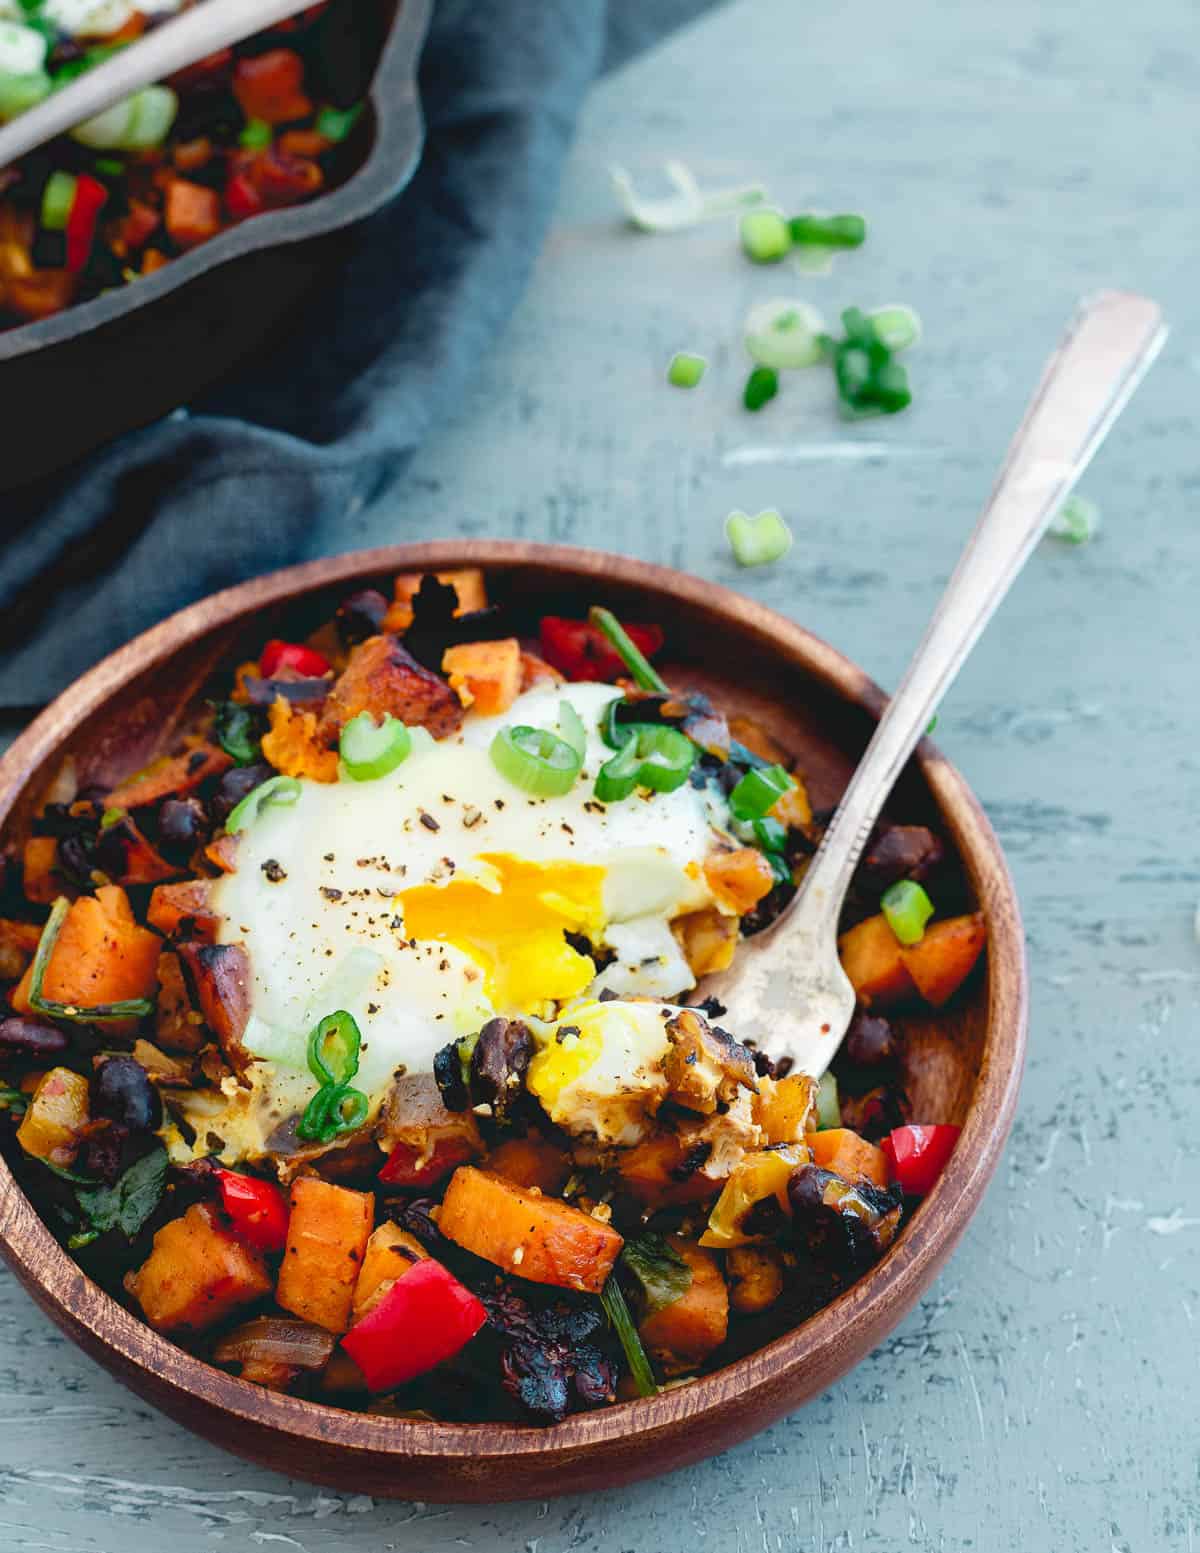 Perfect for dinner in a pinch, this harissa sweet potato hash comes together easily and quickly!